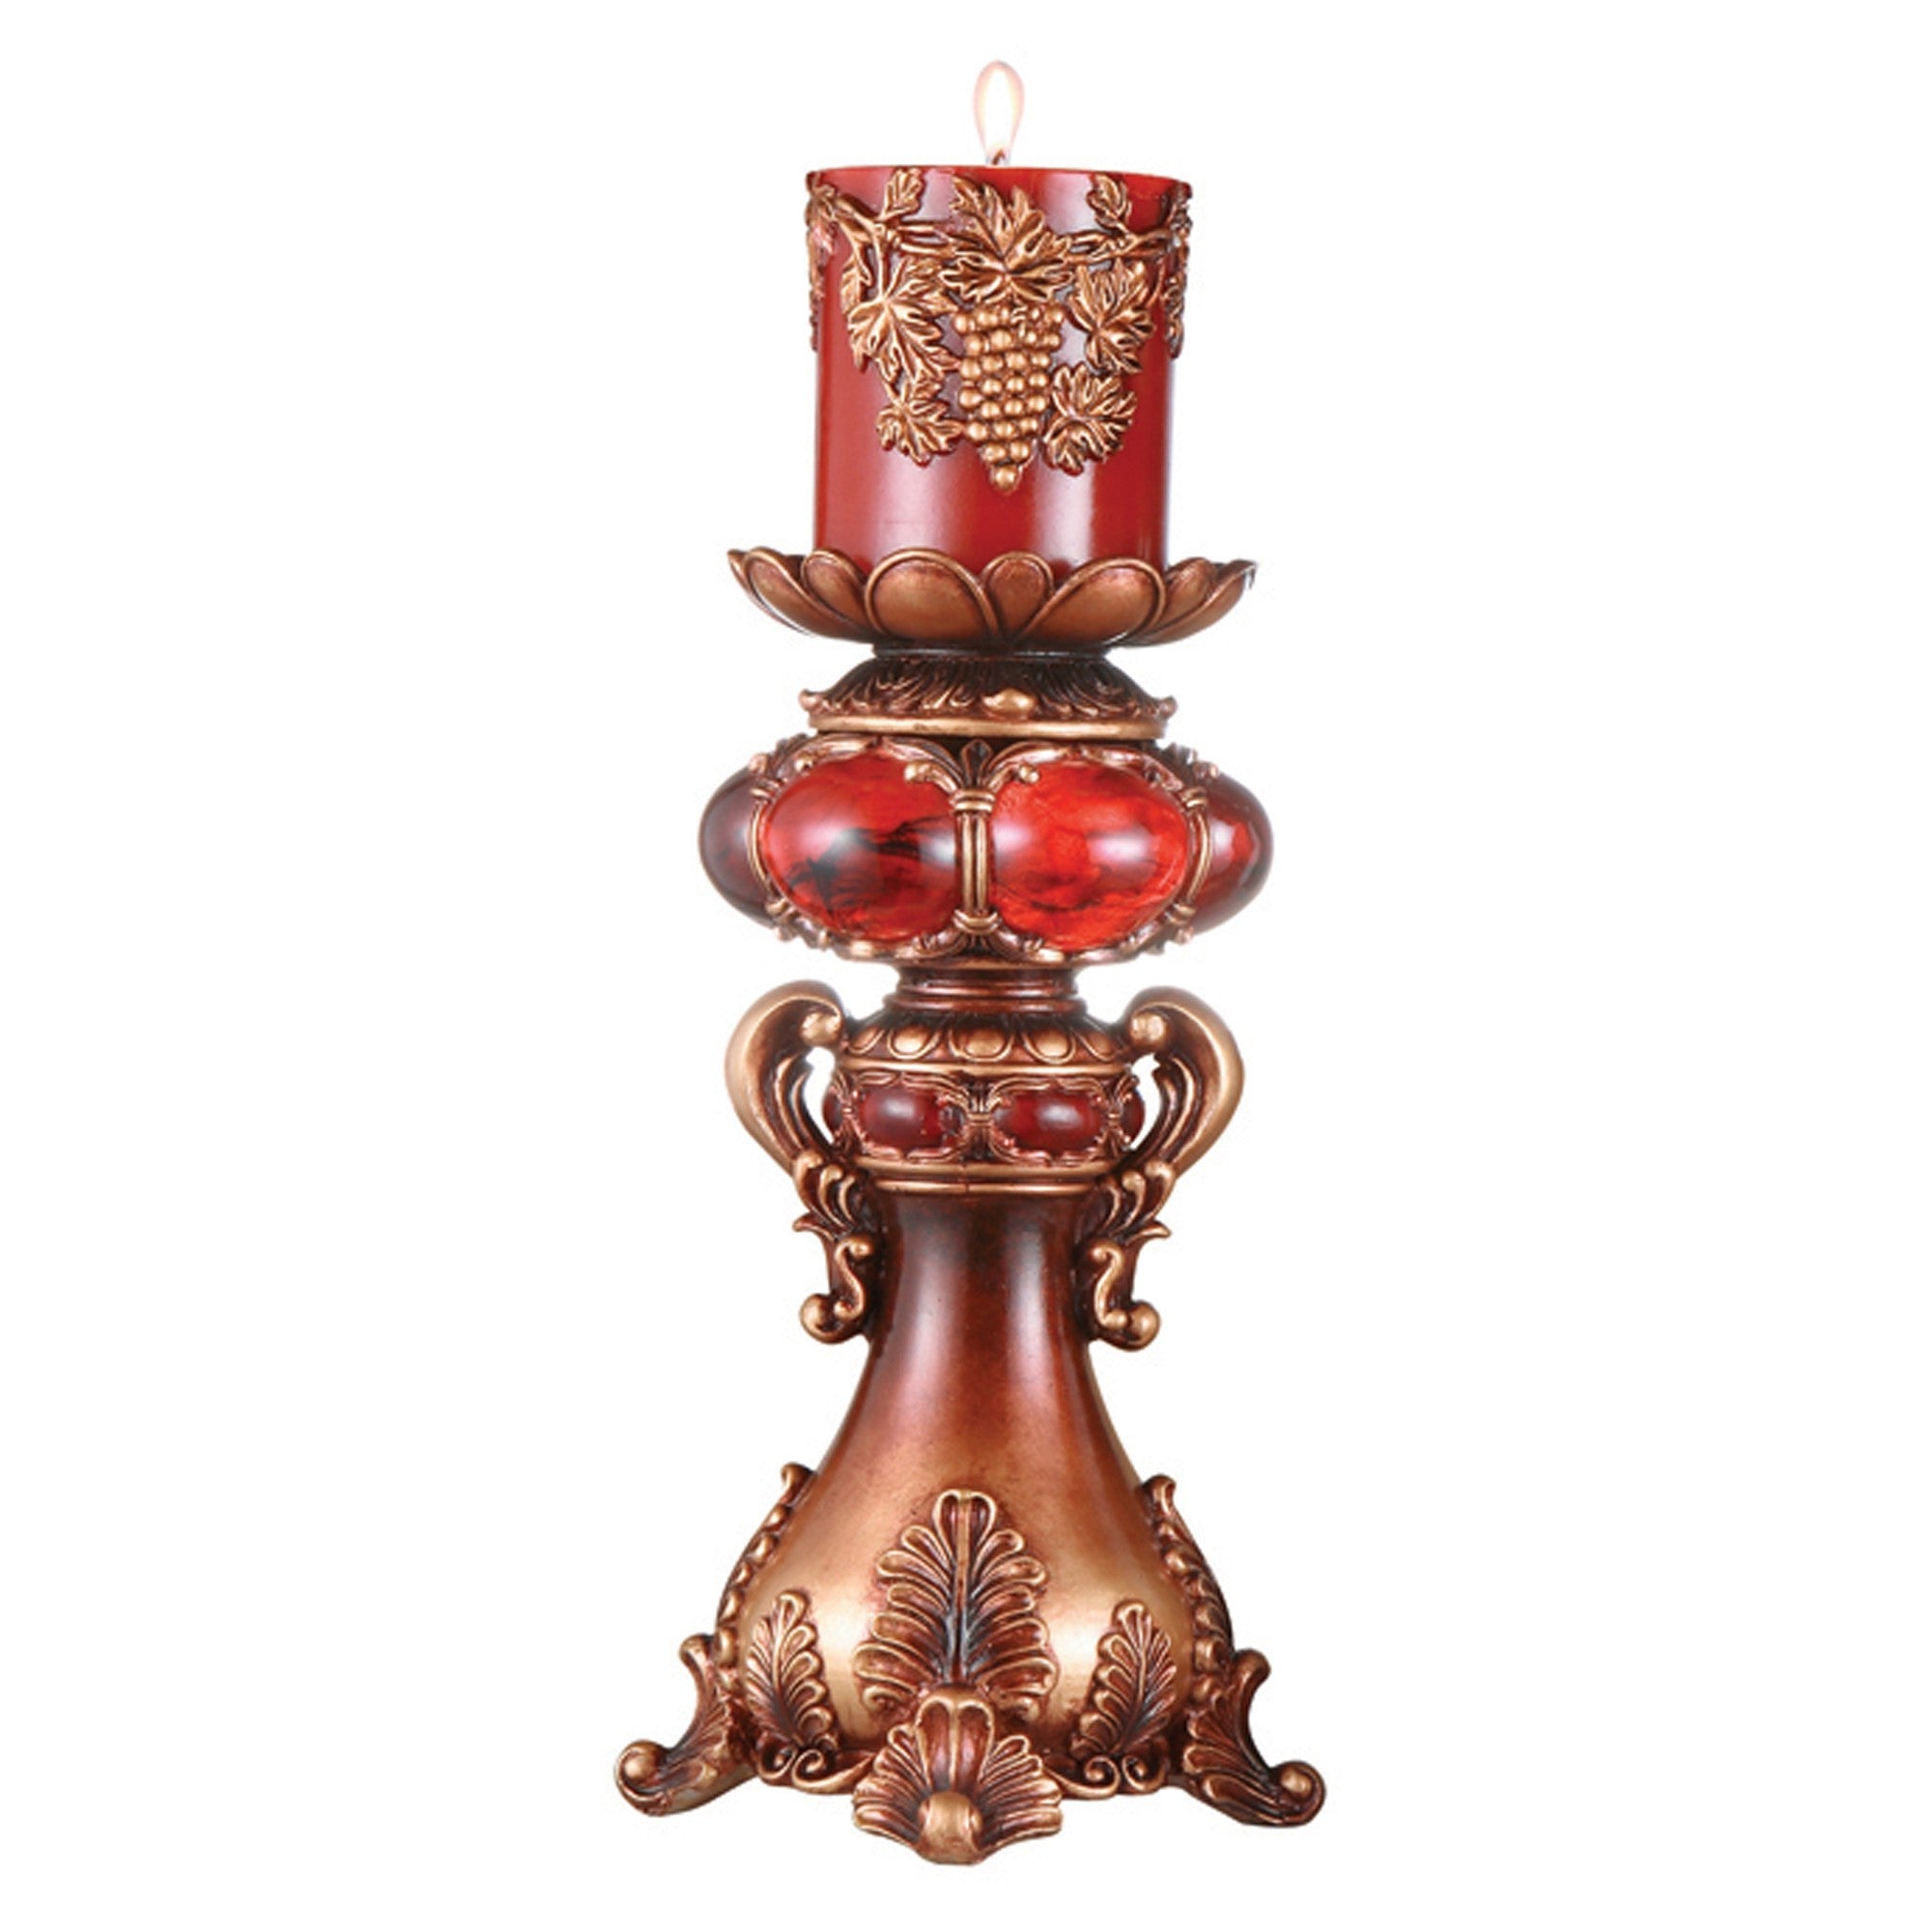 16" Tall Red and Brown Faux Marble Candle Holder with Candle